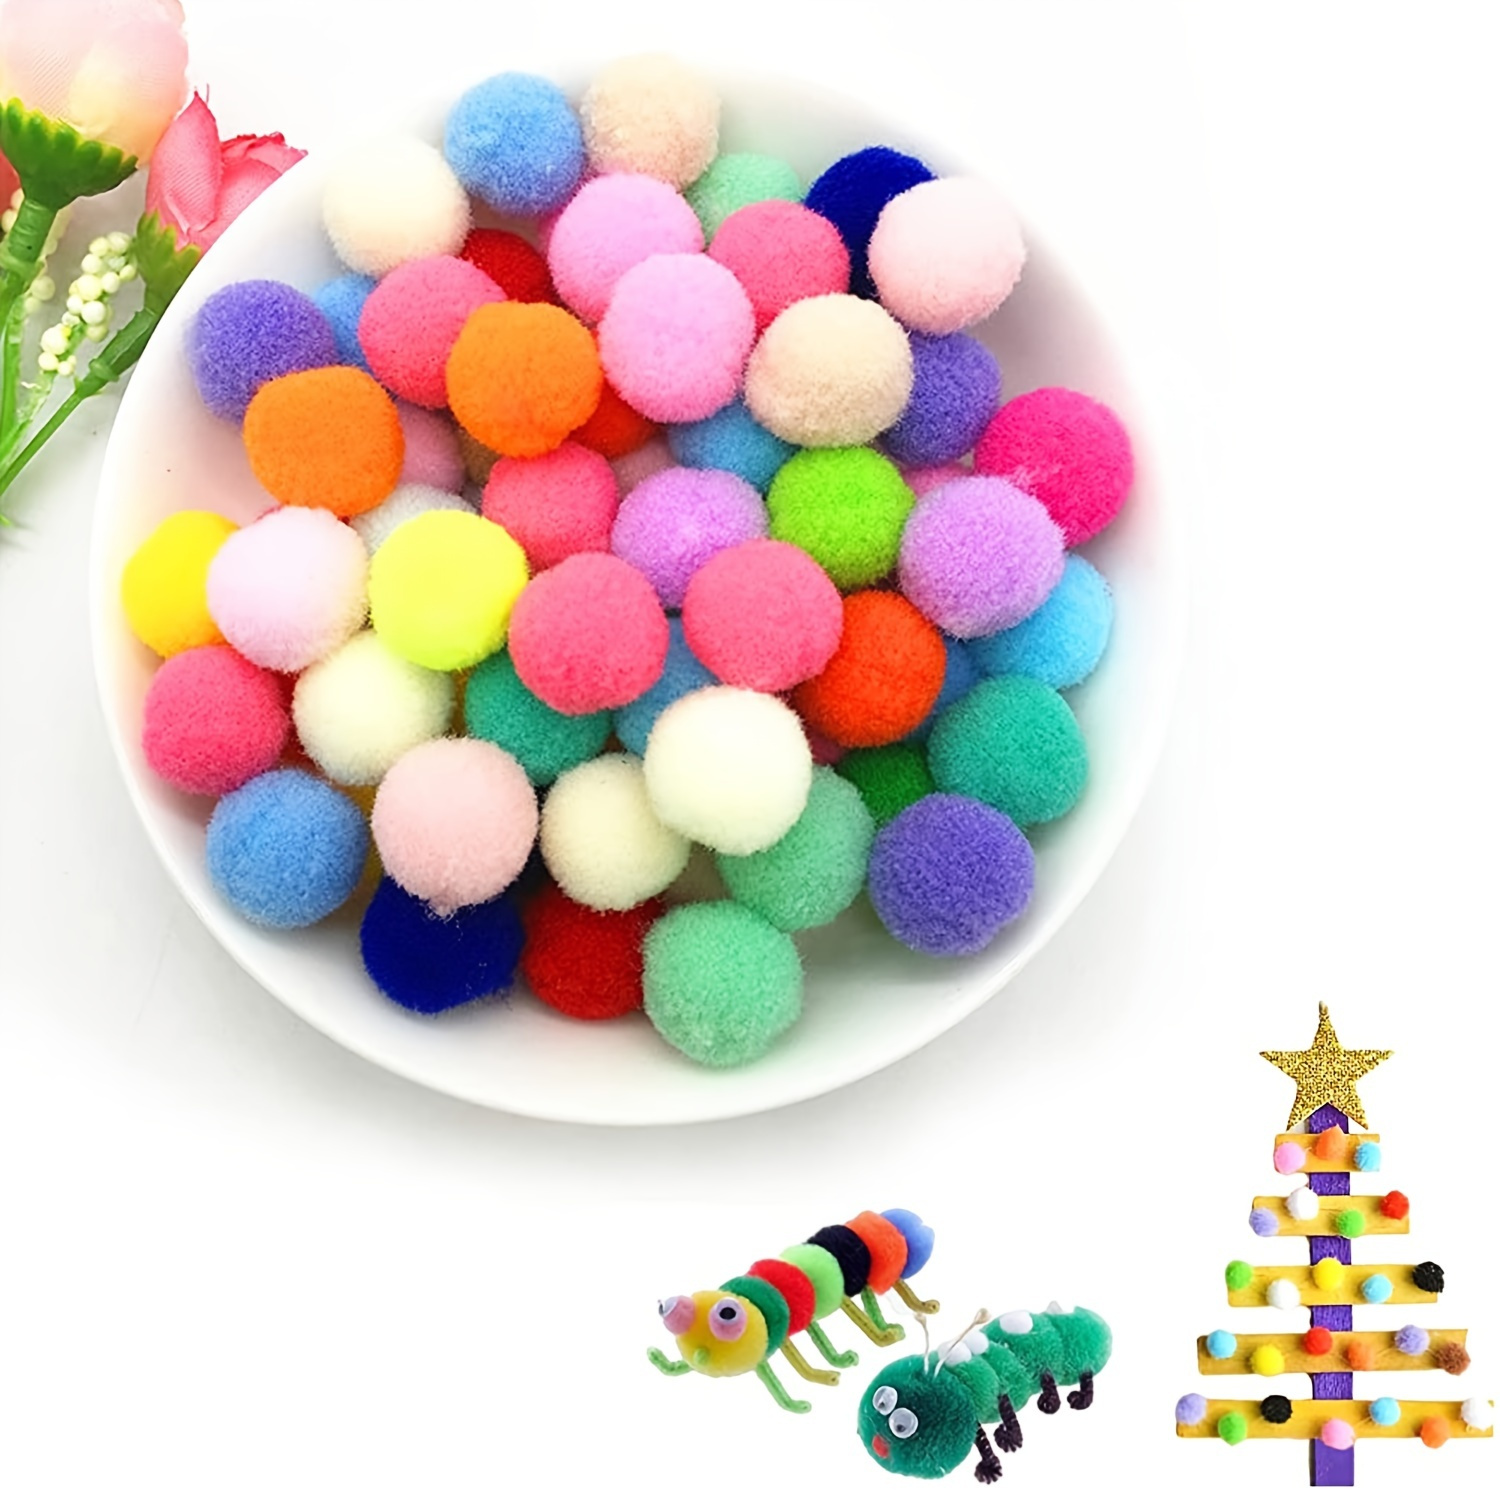 250pcs Arts And Crafts - Colorful Assorted Pompoms, Rainbow Puff Cotton  Balls For Crafts DIY Project Home Party Holiday Creative Decorations